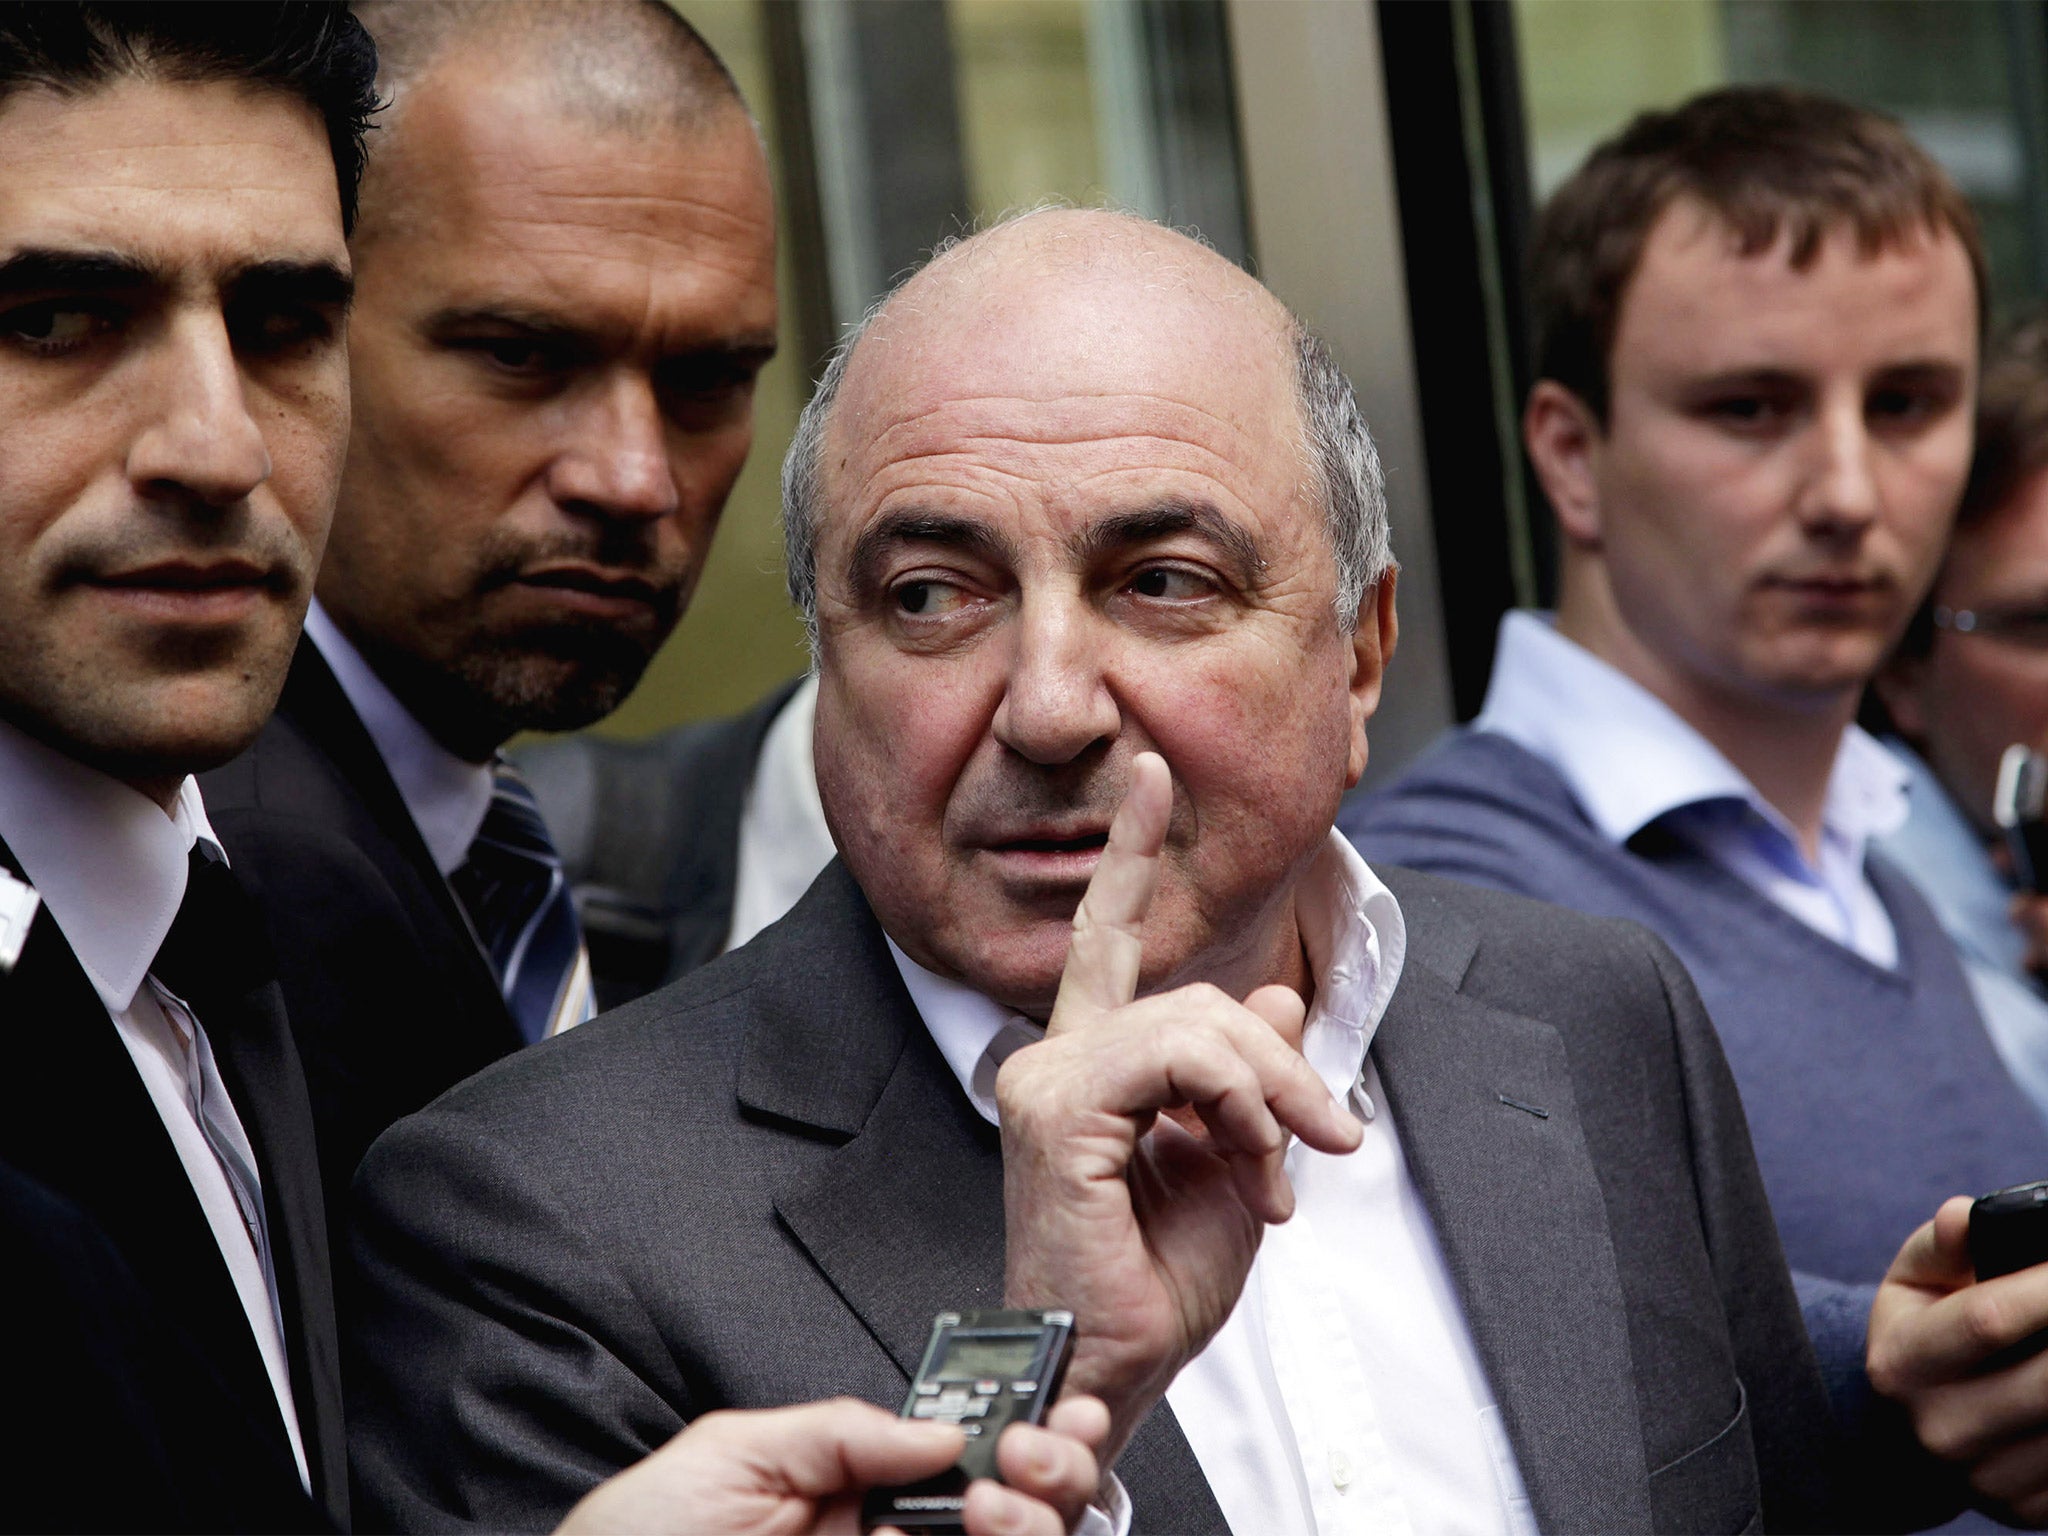 Beaten: Boris Berezovsky after losing his lawsuit against Roman Abramovich. Soon afterwards, he wrote his first begging letter to Putin